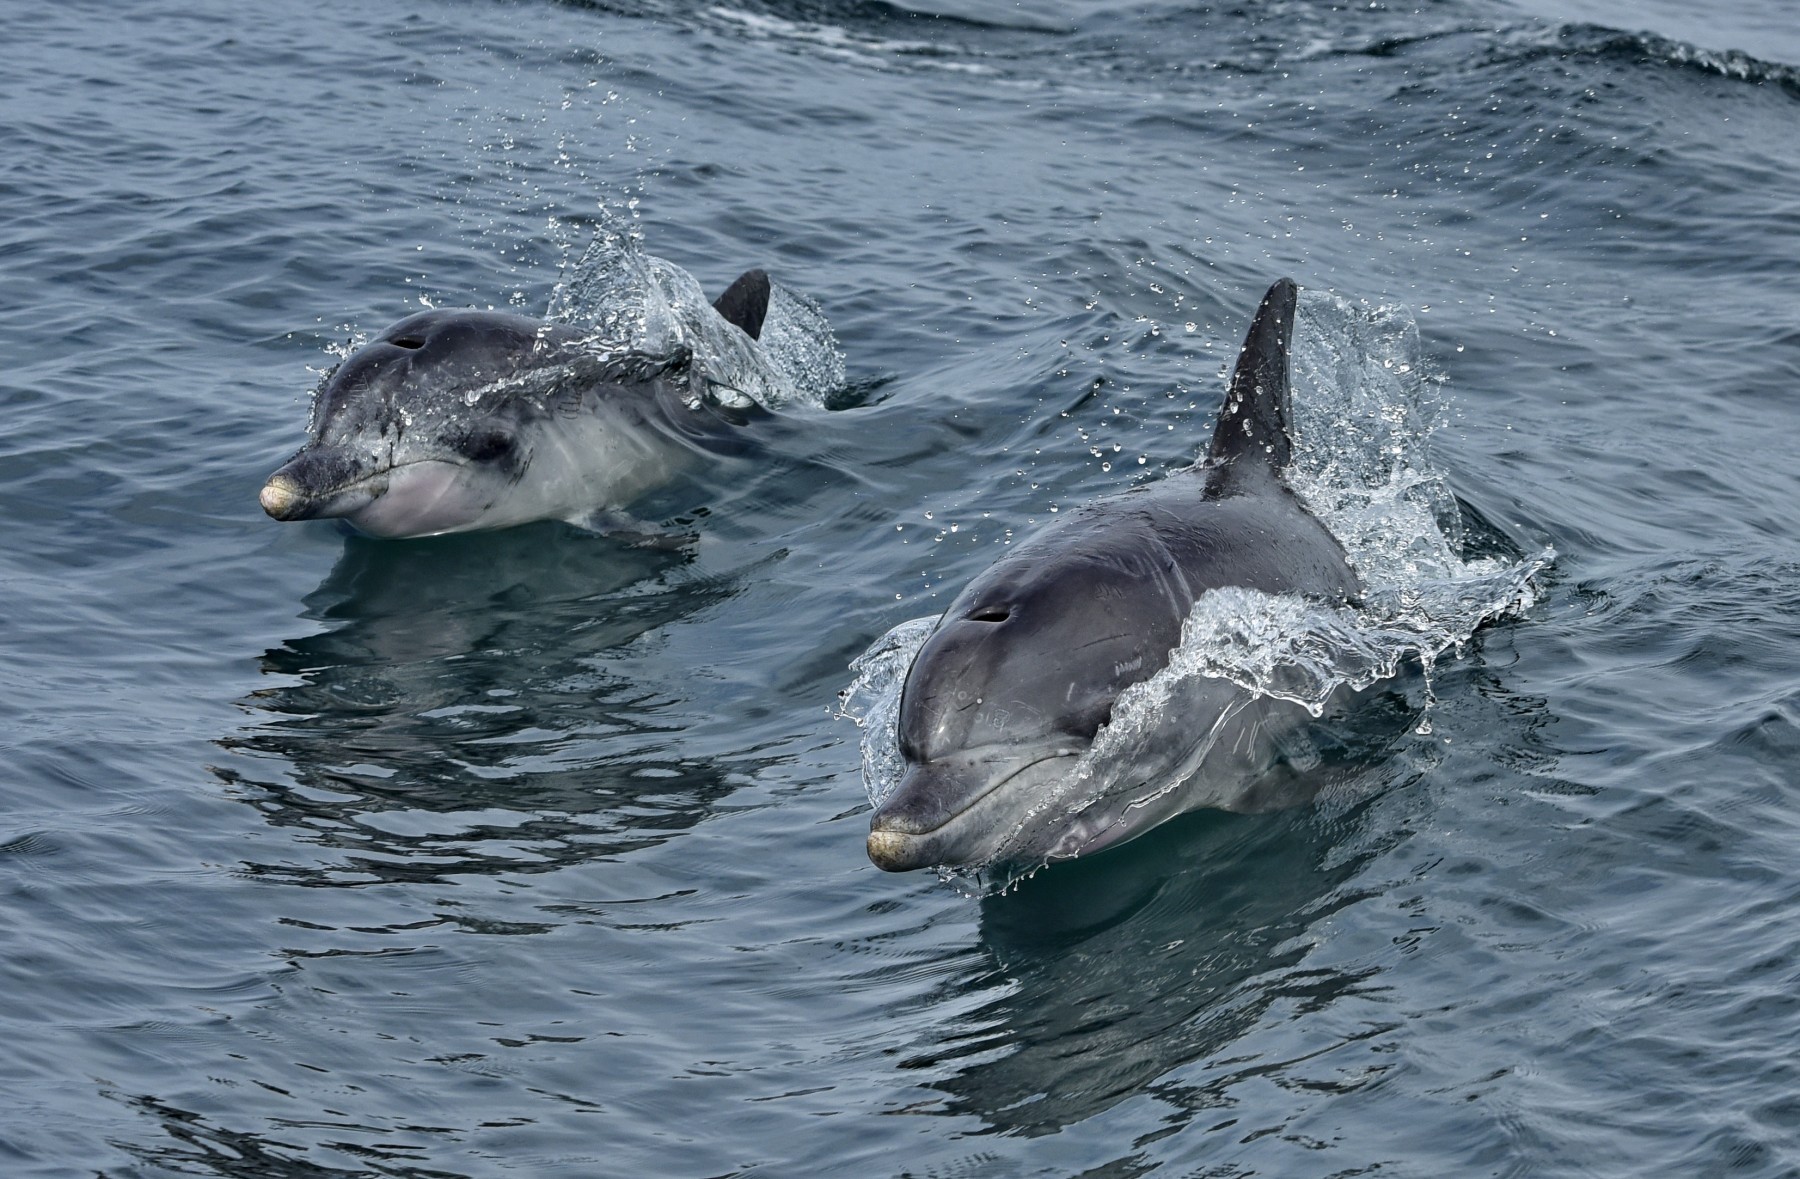 Dolphins in the wild at Algoa Bay Whale Heritage Site in South Africa